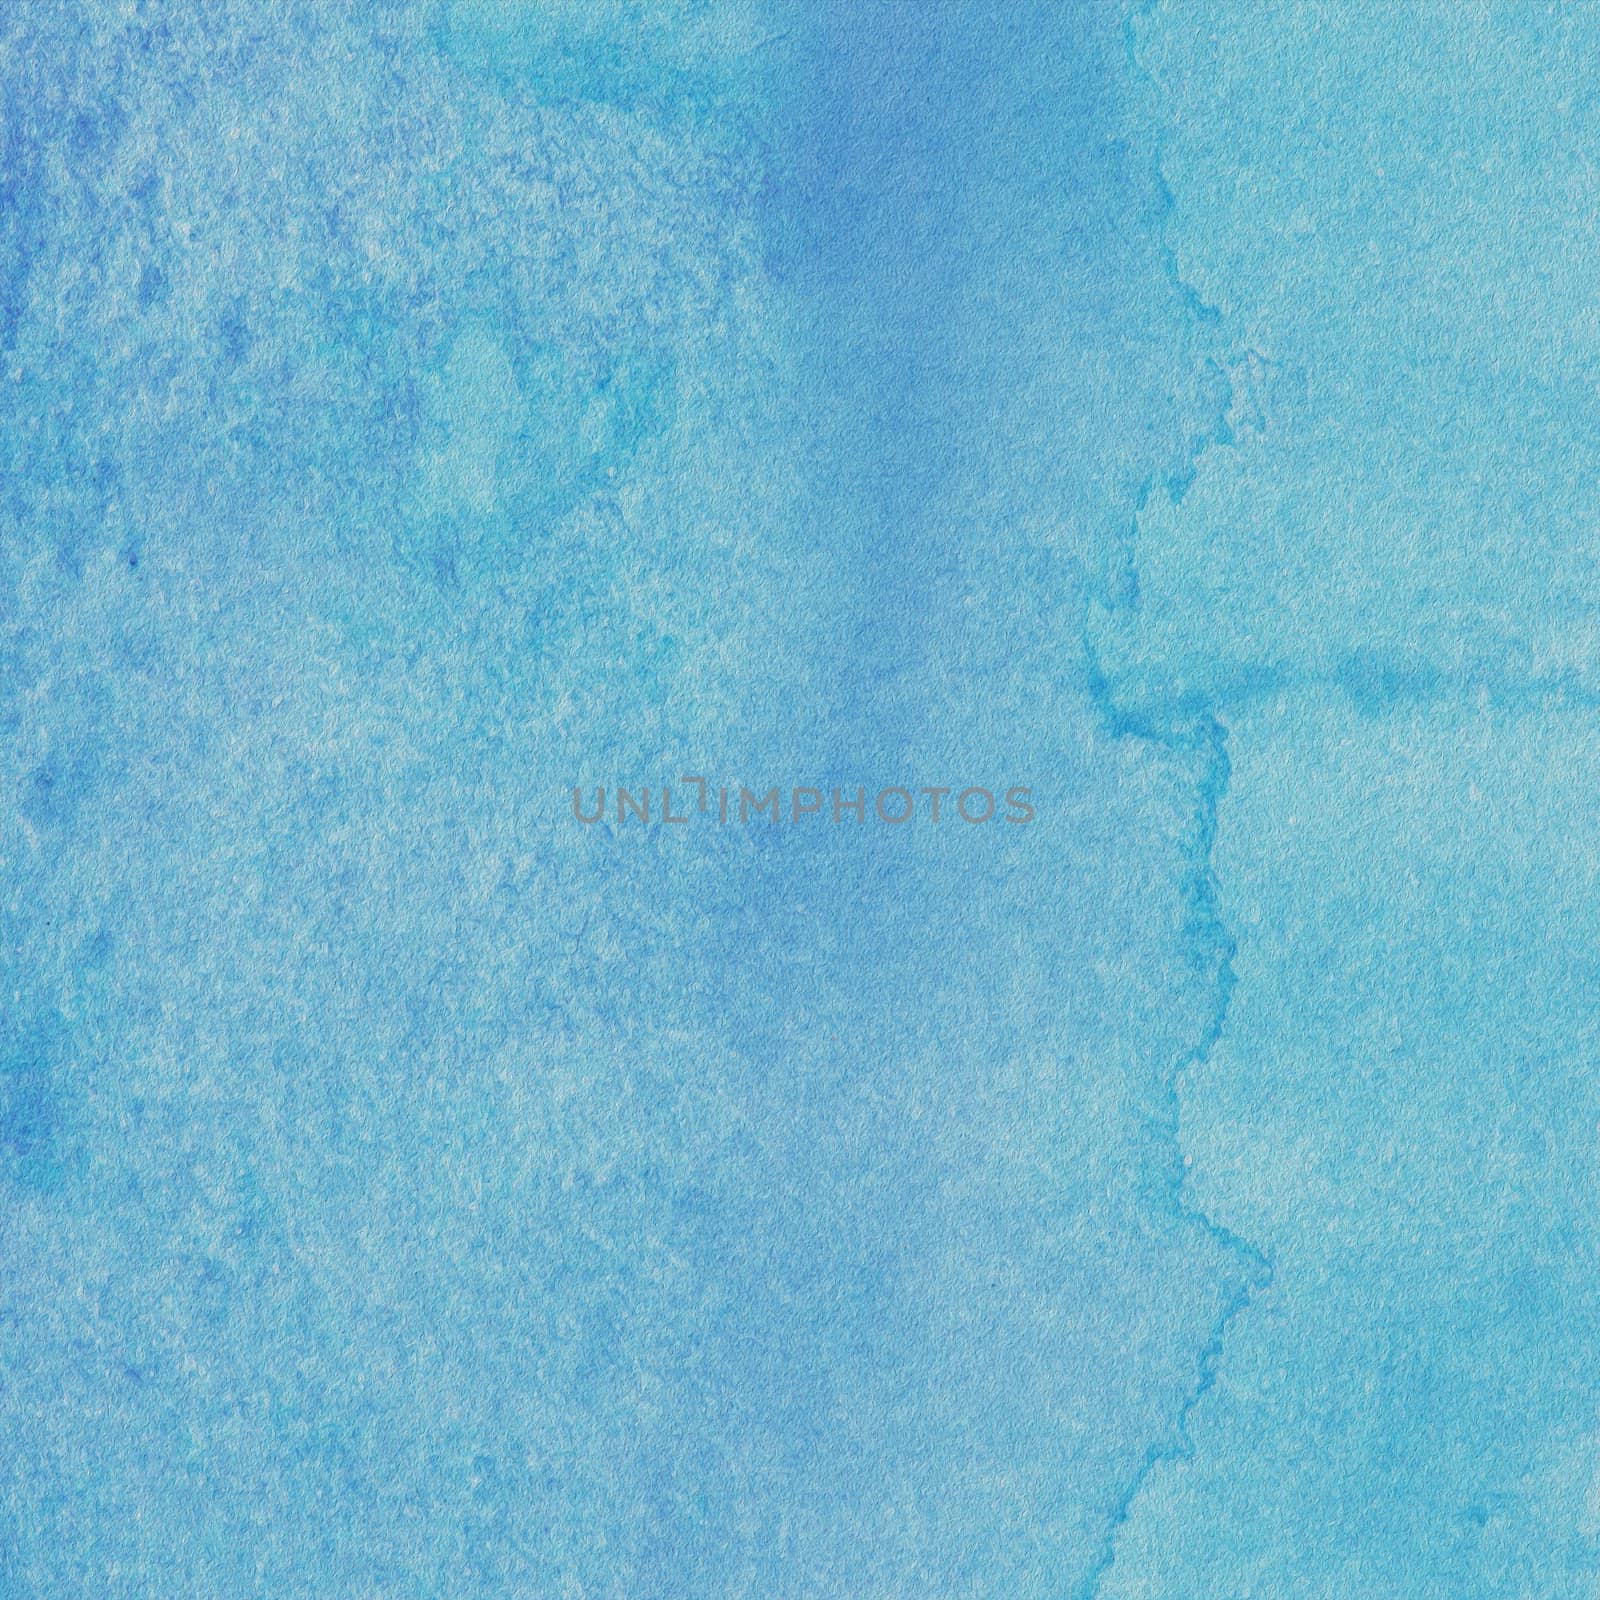 Abstract light blue watercolor background  by wyoosumran